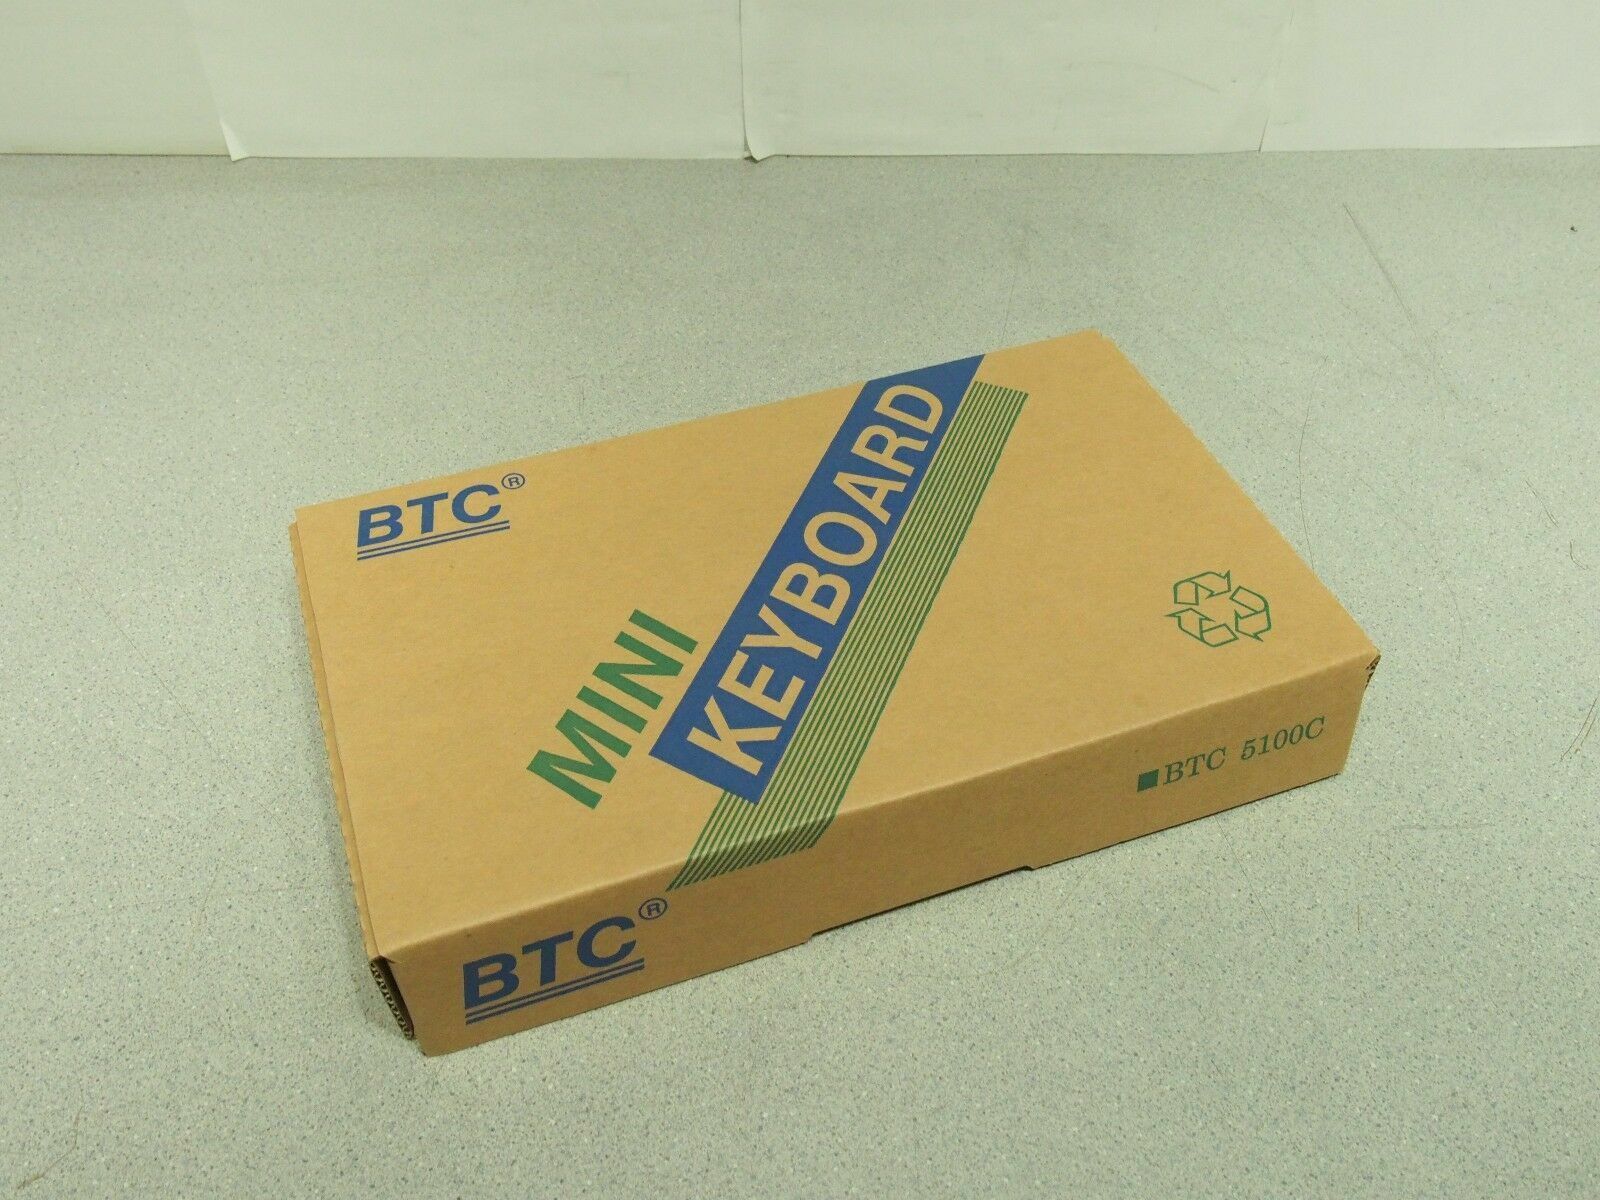 New In Box BTC 5100C DIN 5 Pin Mini Compact Keyboard AT Din 5 Connector